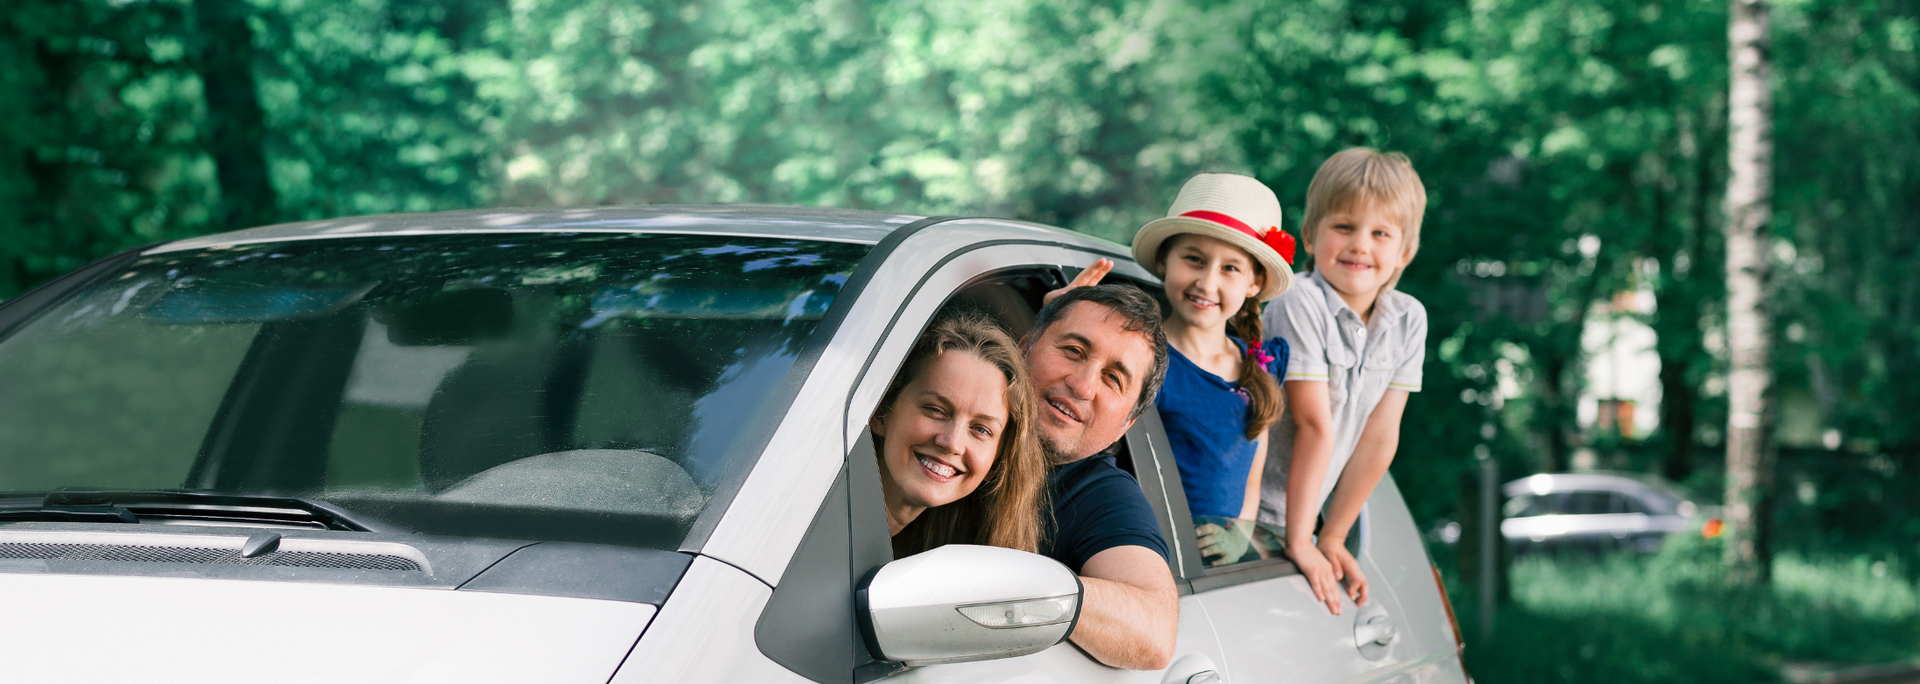 Picture of kids in a car